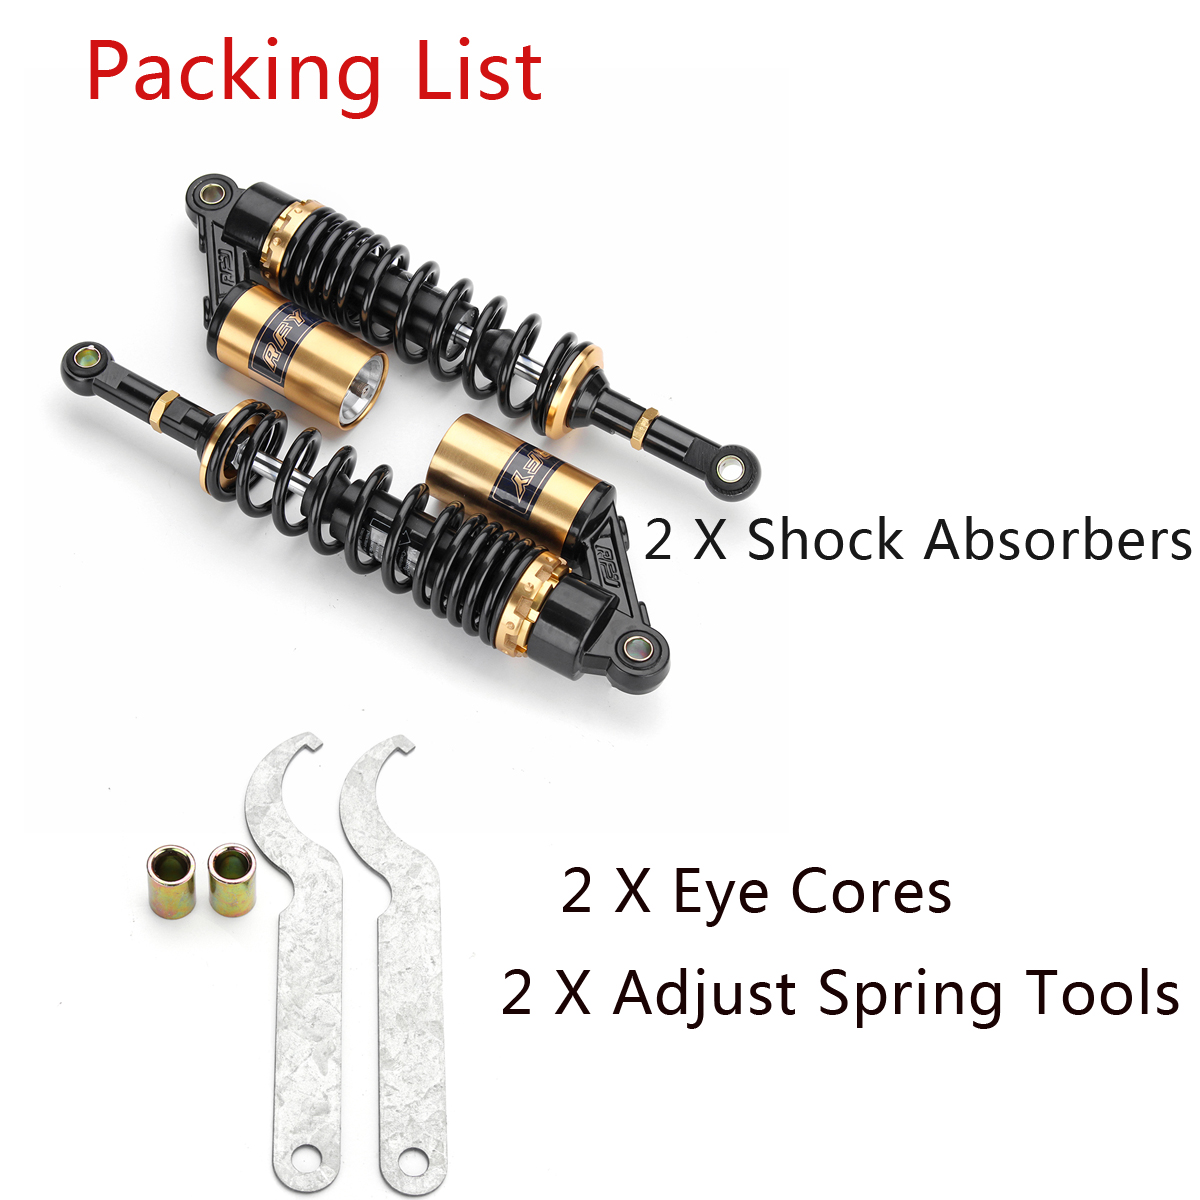 400mm-1574inch-Rear-Air-Shock-Absorbers-Suspension-For-ATV-Motorcycle-Dirt-Bike-1407373